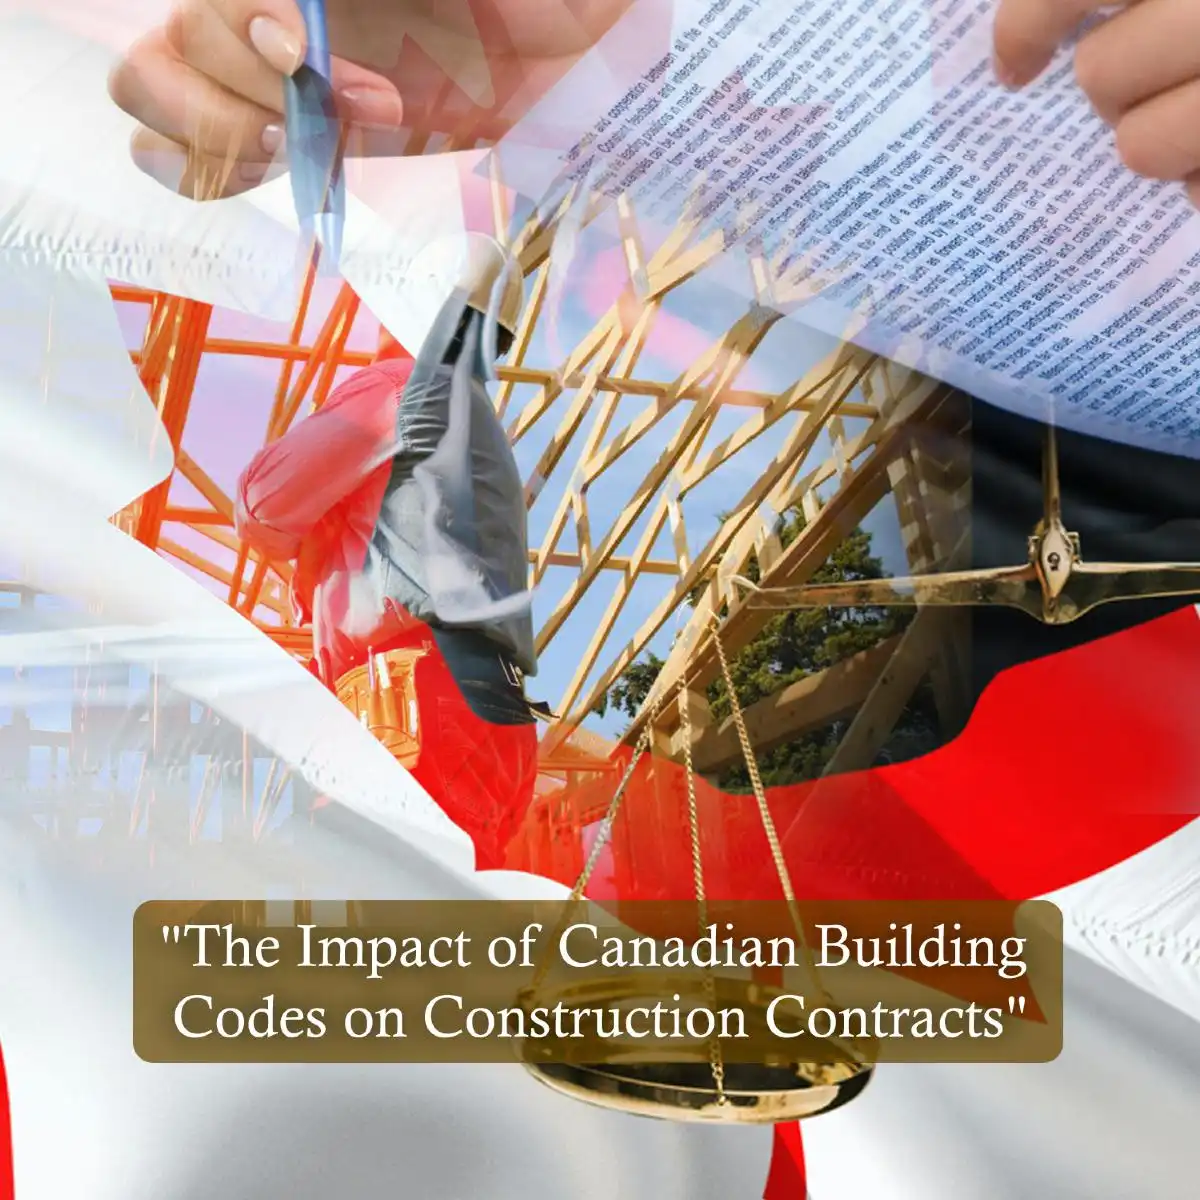 The Impact of Canadian Building Codes on Construction Contracts